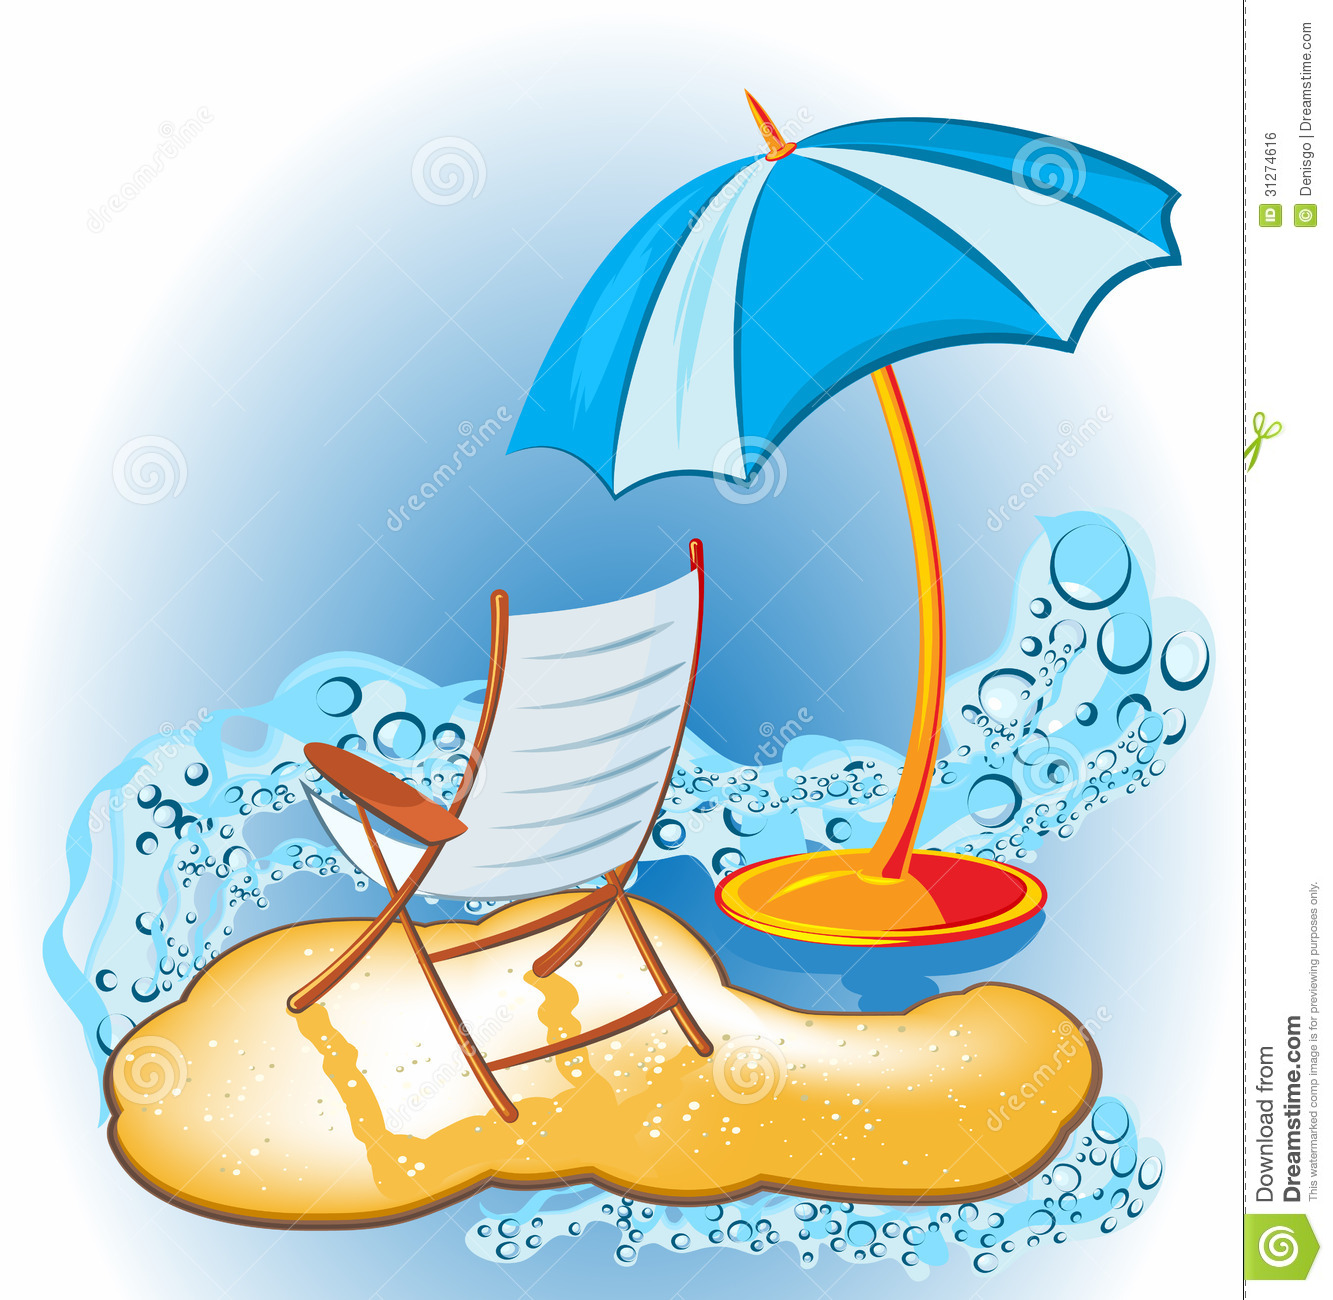 summer holiday clip art free images - photo #17